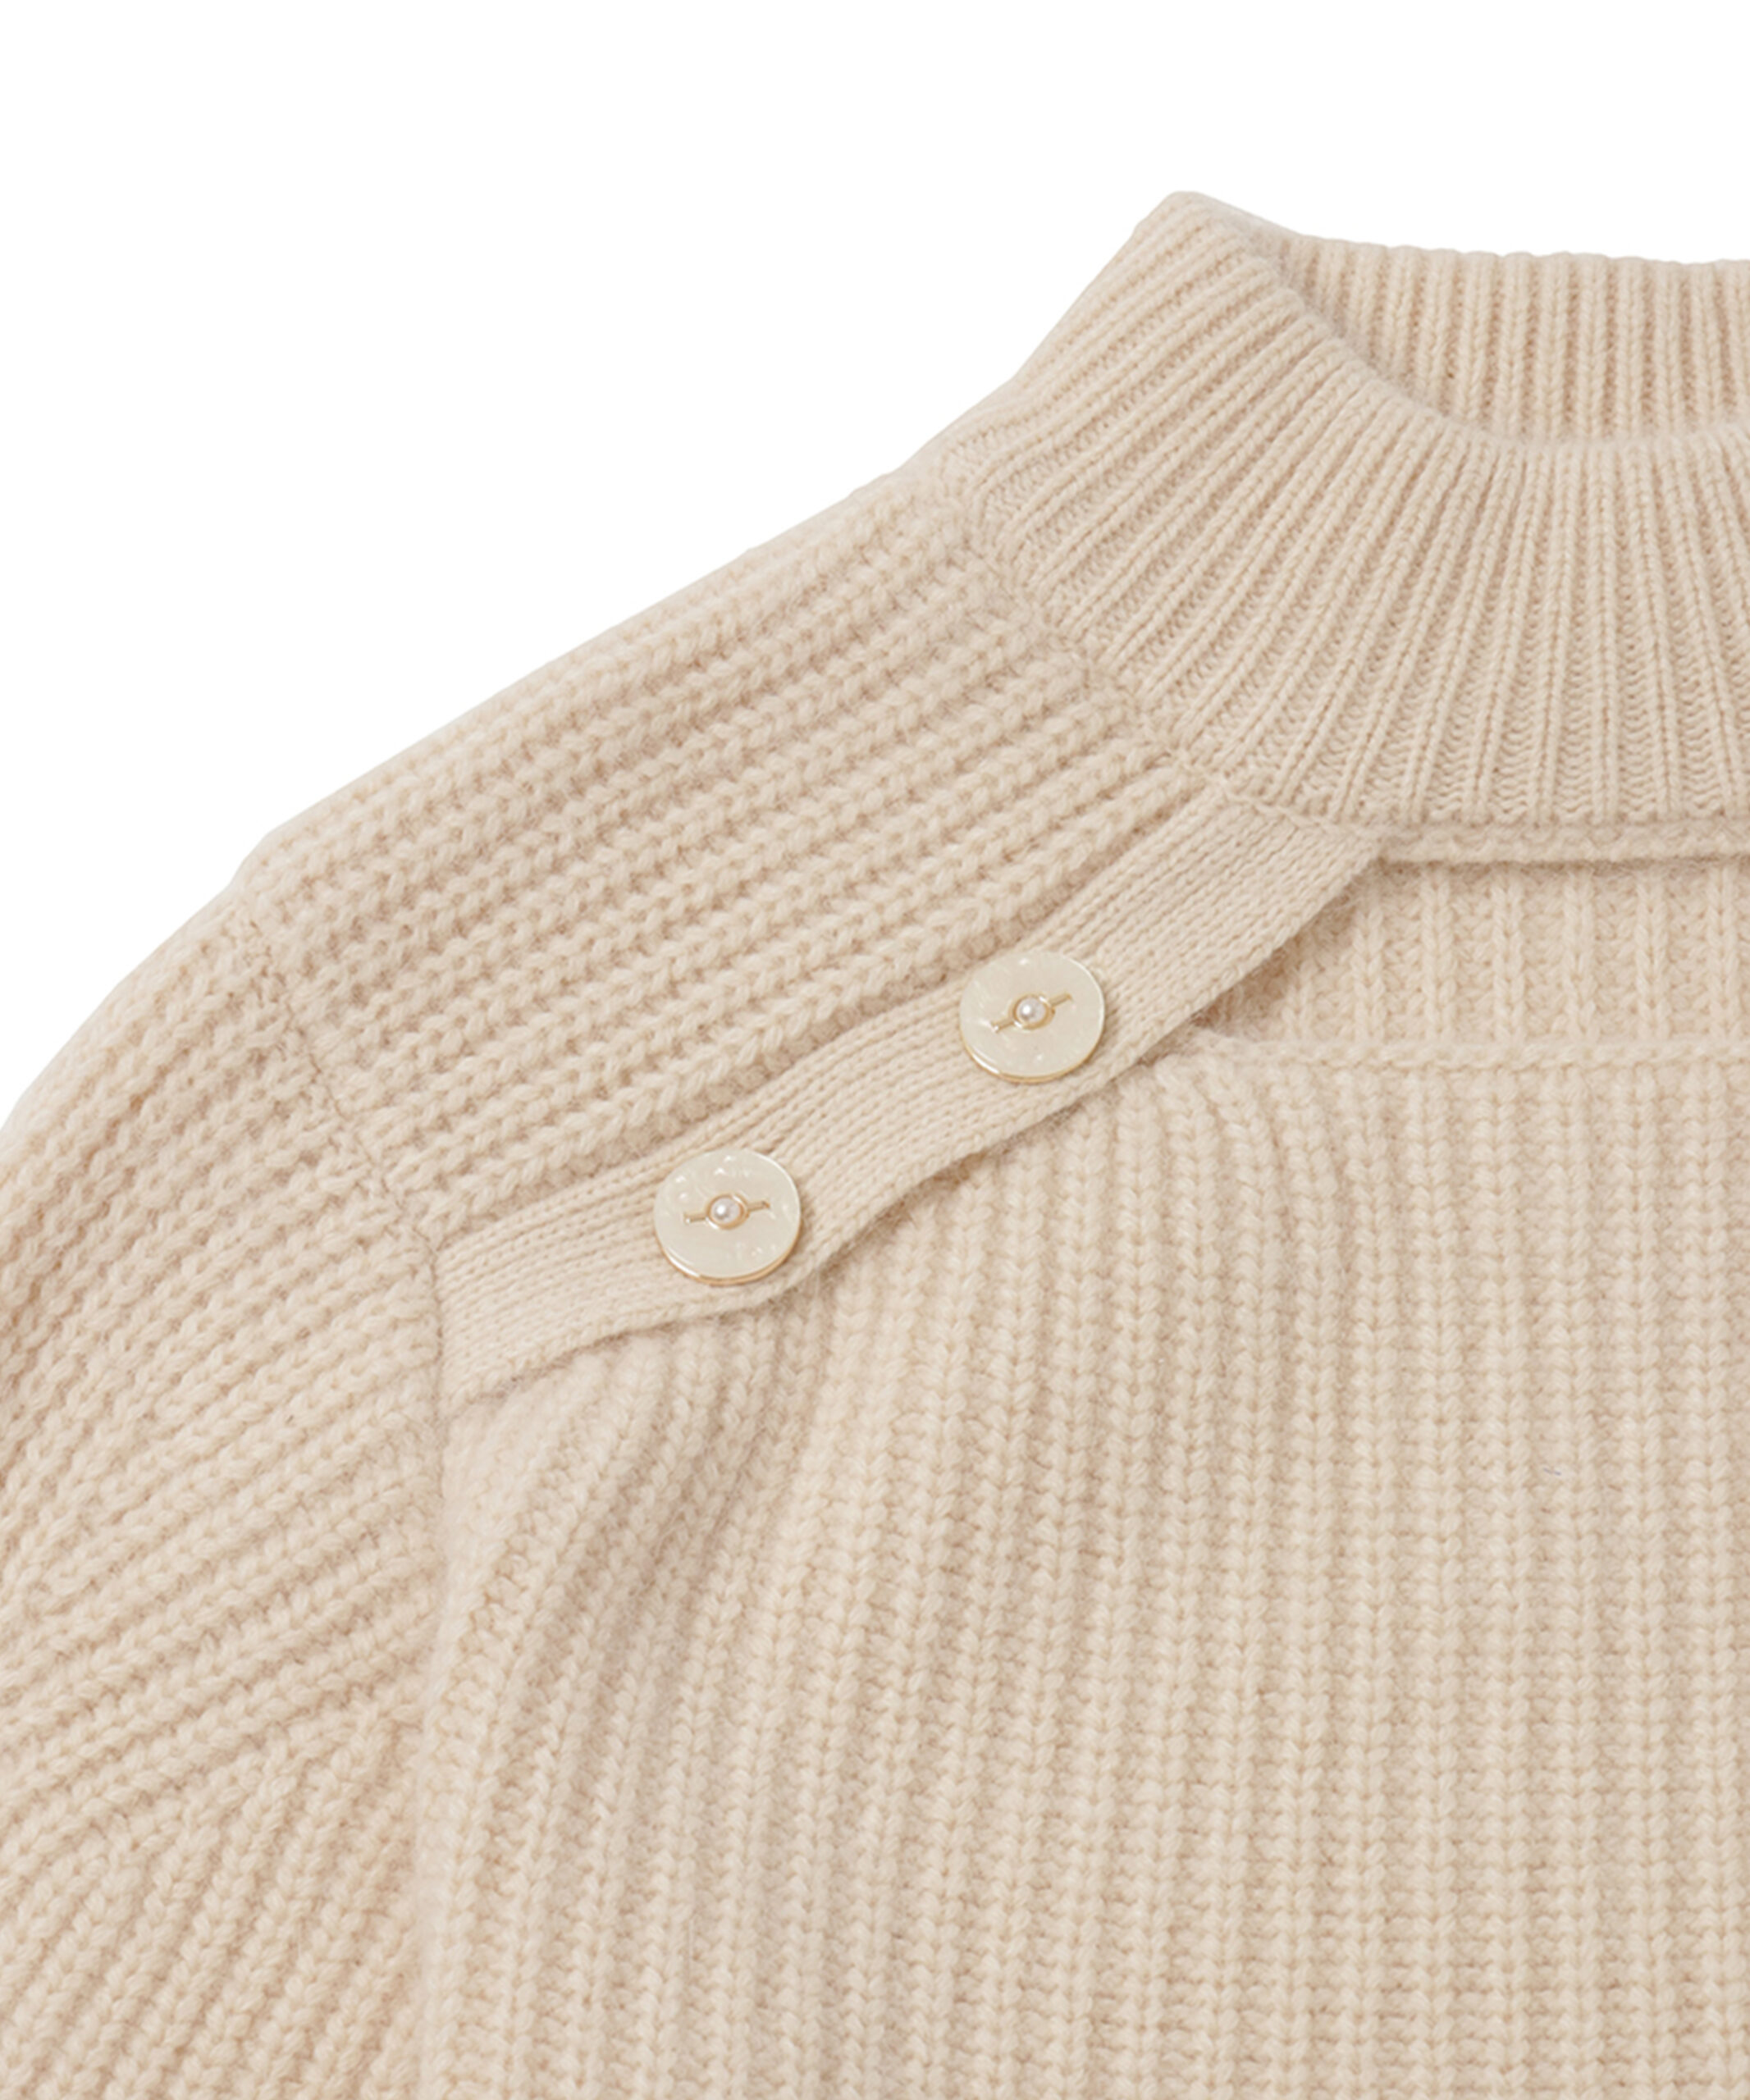 Rosé Muse ニットワンピ fethery knit onepiece